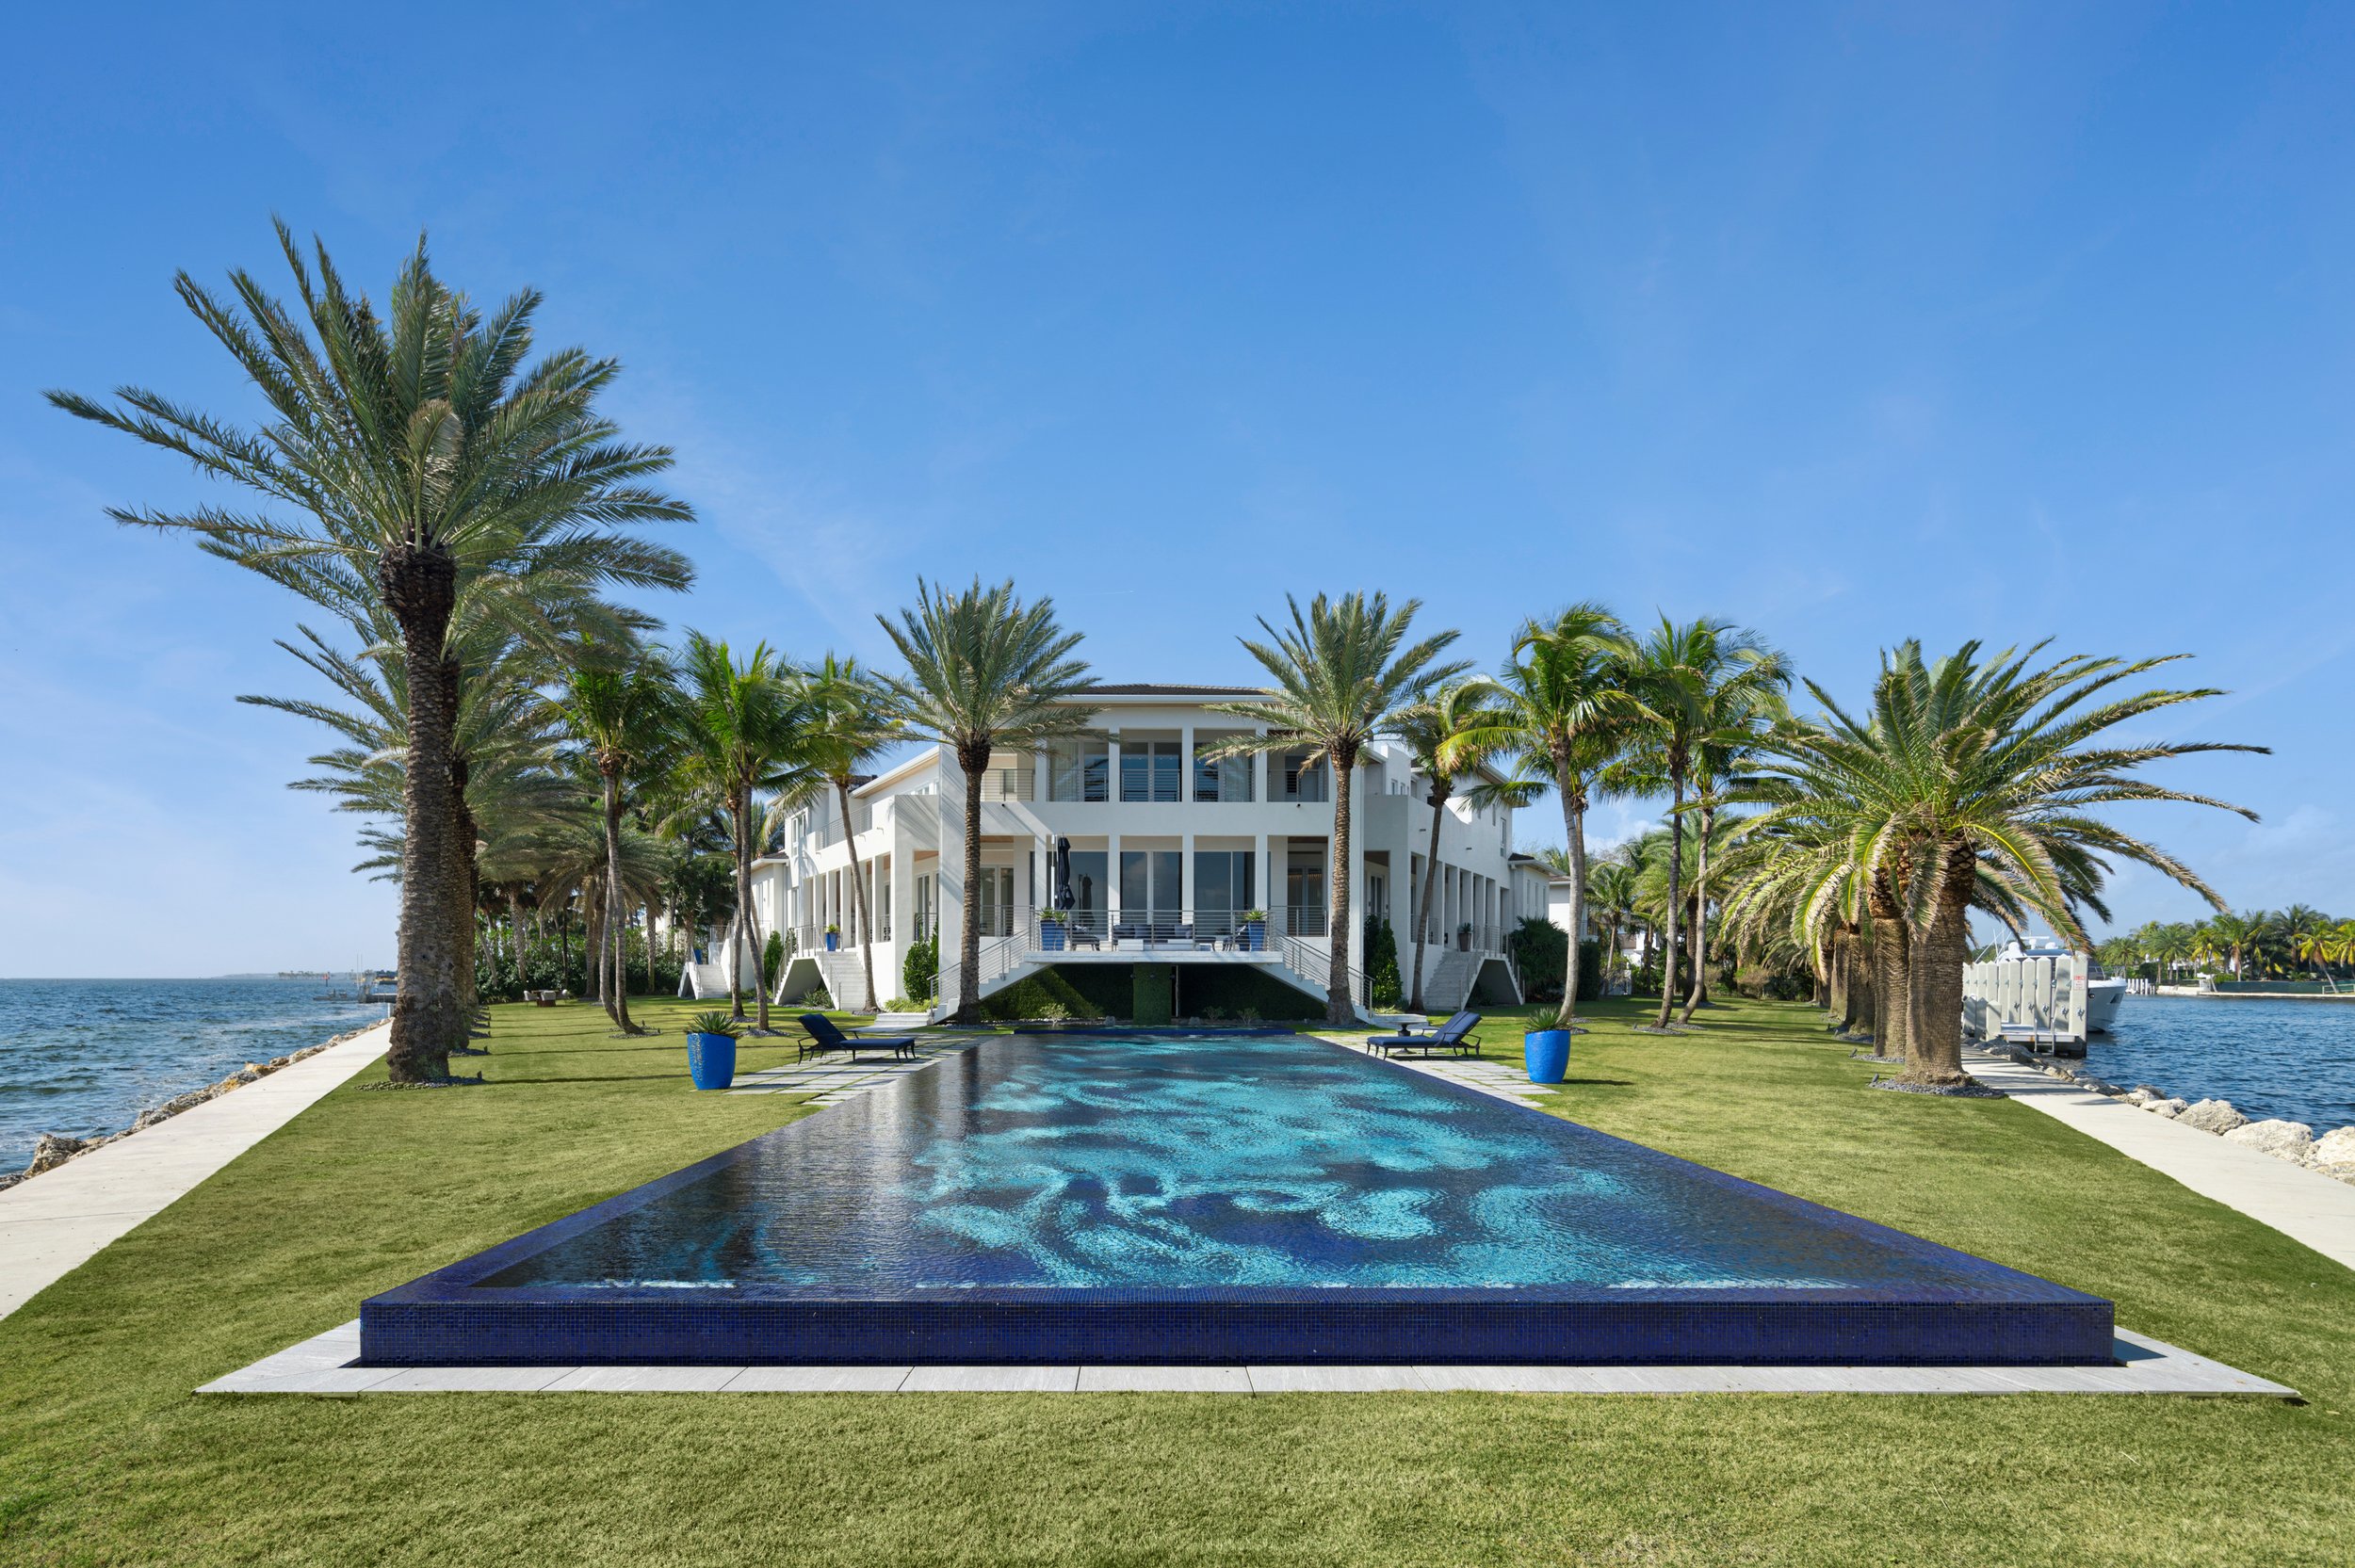 Coral Gables Waterfront Estate Hits The Market For $57 Million 2.jpg